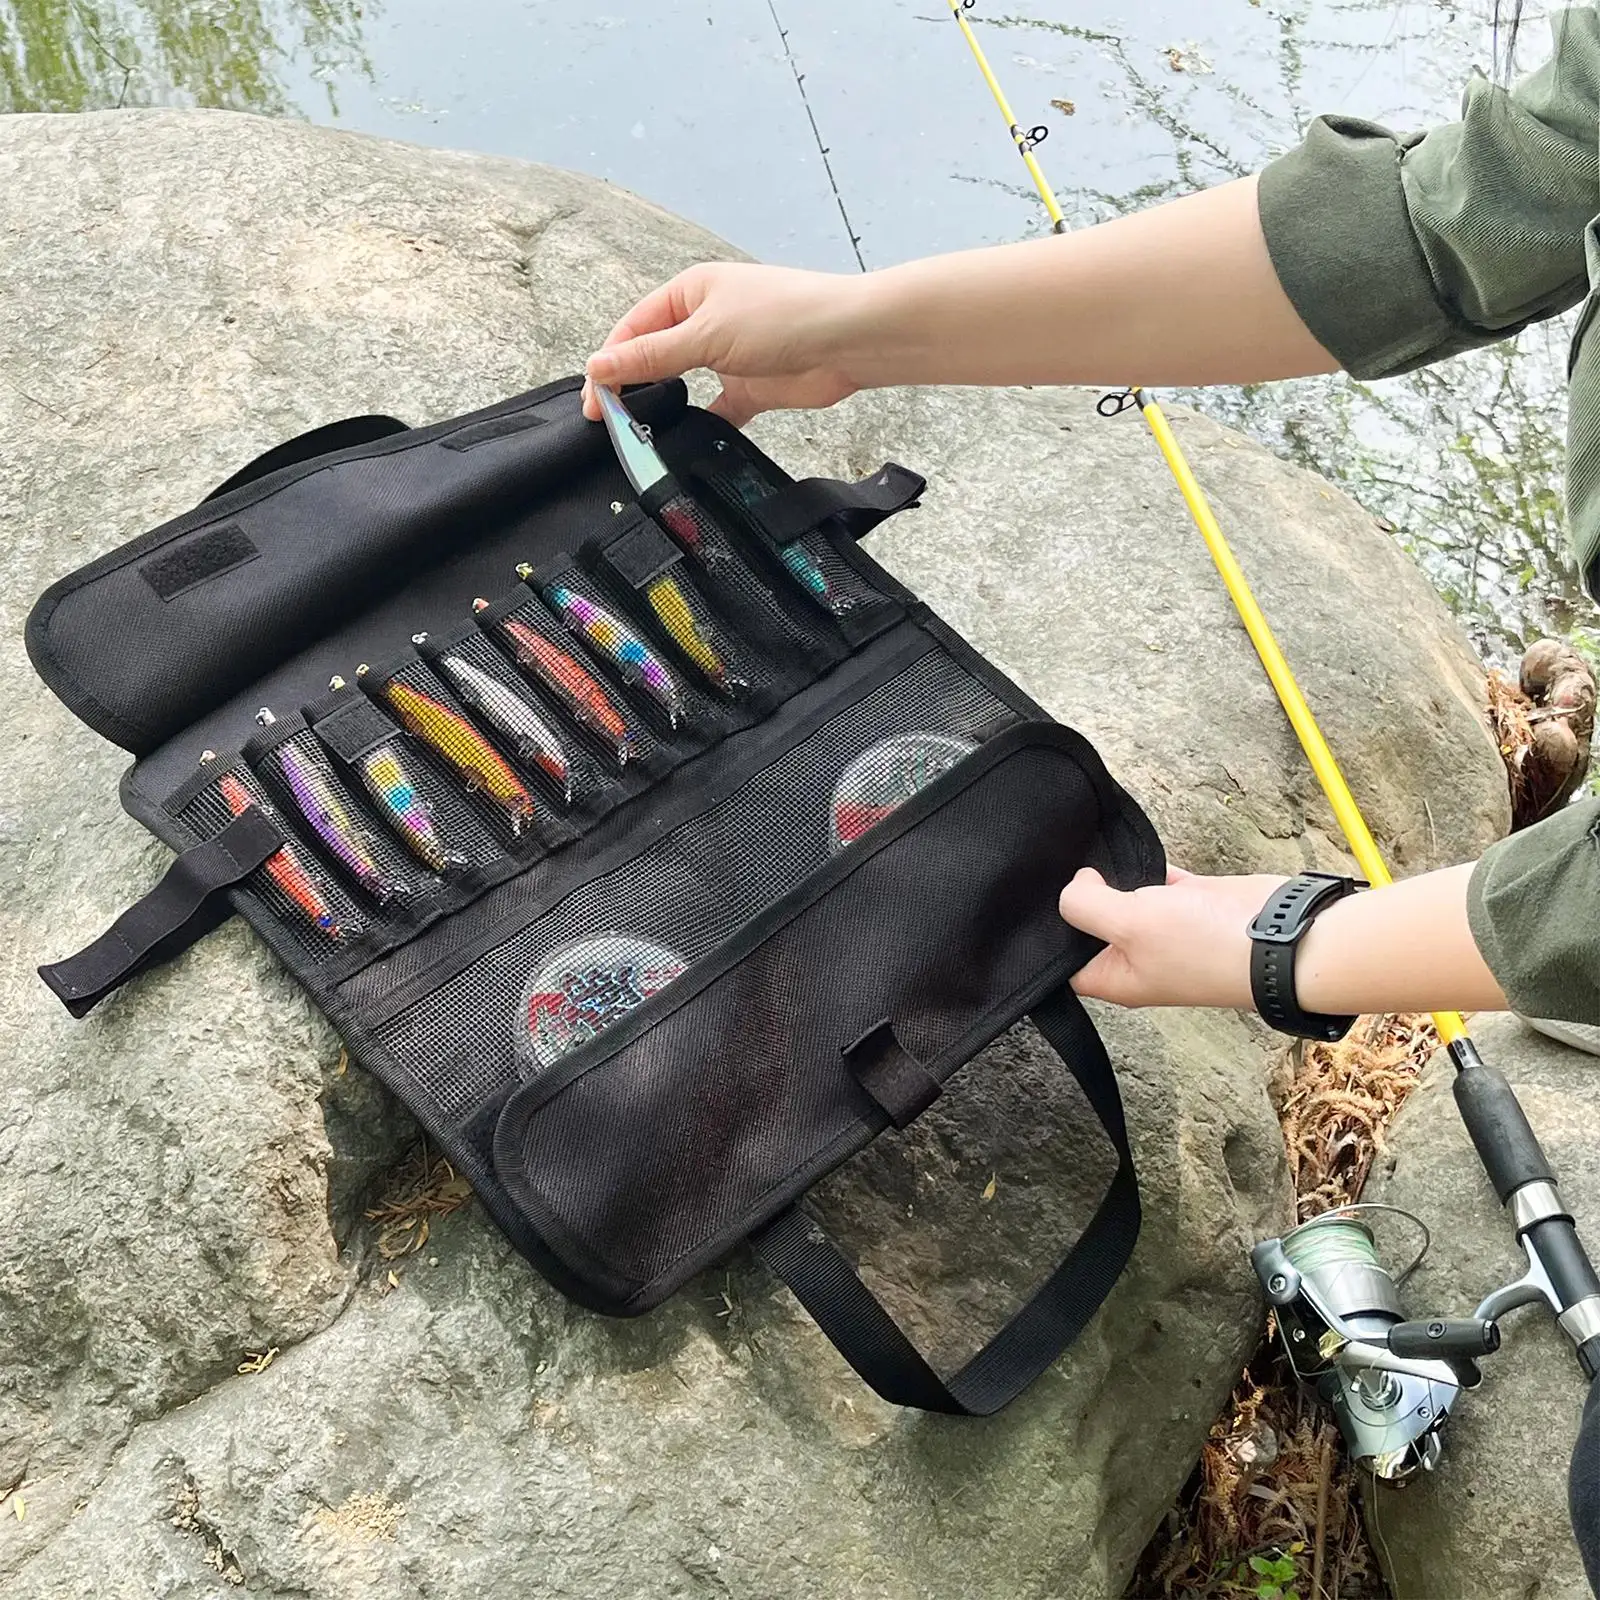 Portable Fishing Bait Bag Fishing Lure Jigs Pouch 24 Pockets Organizer Container Outdoor Tackle Carry Case Gear